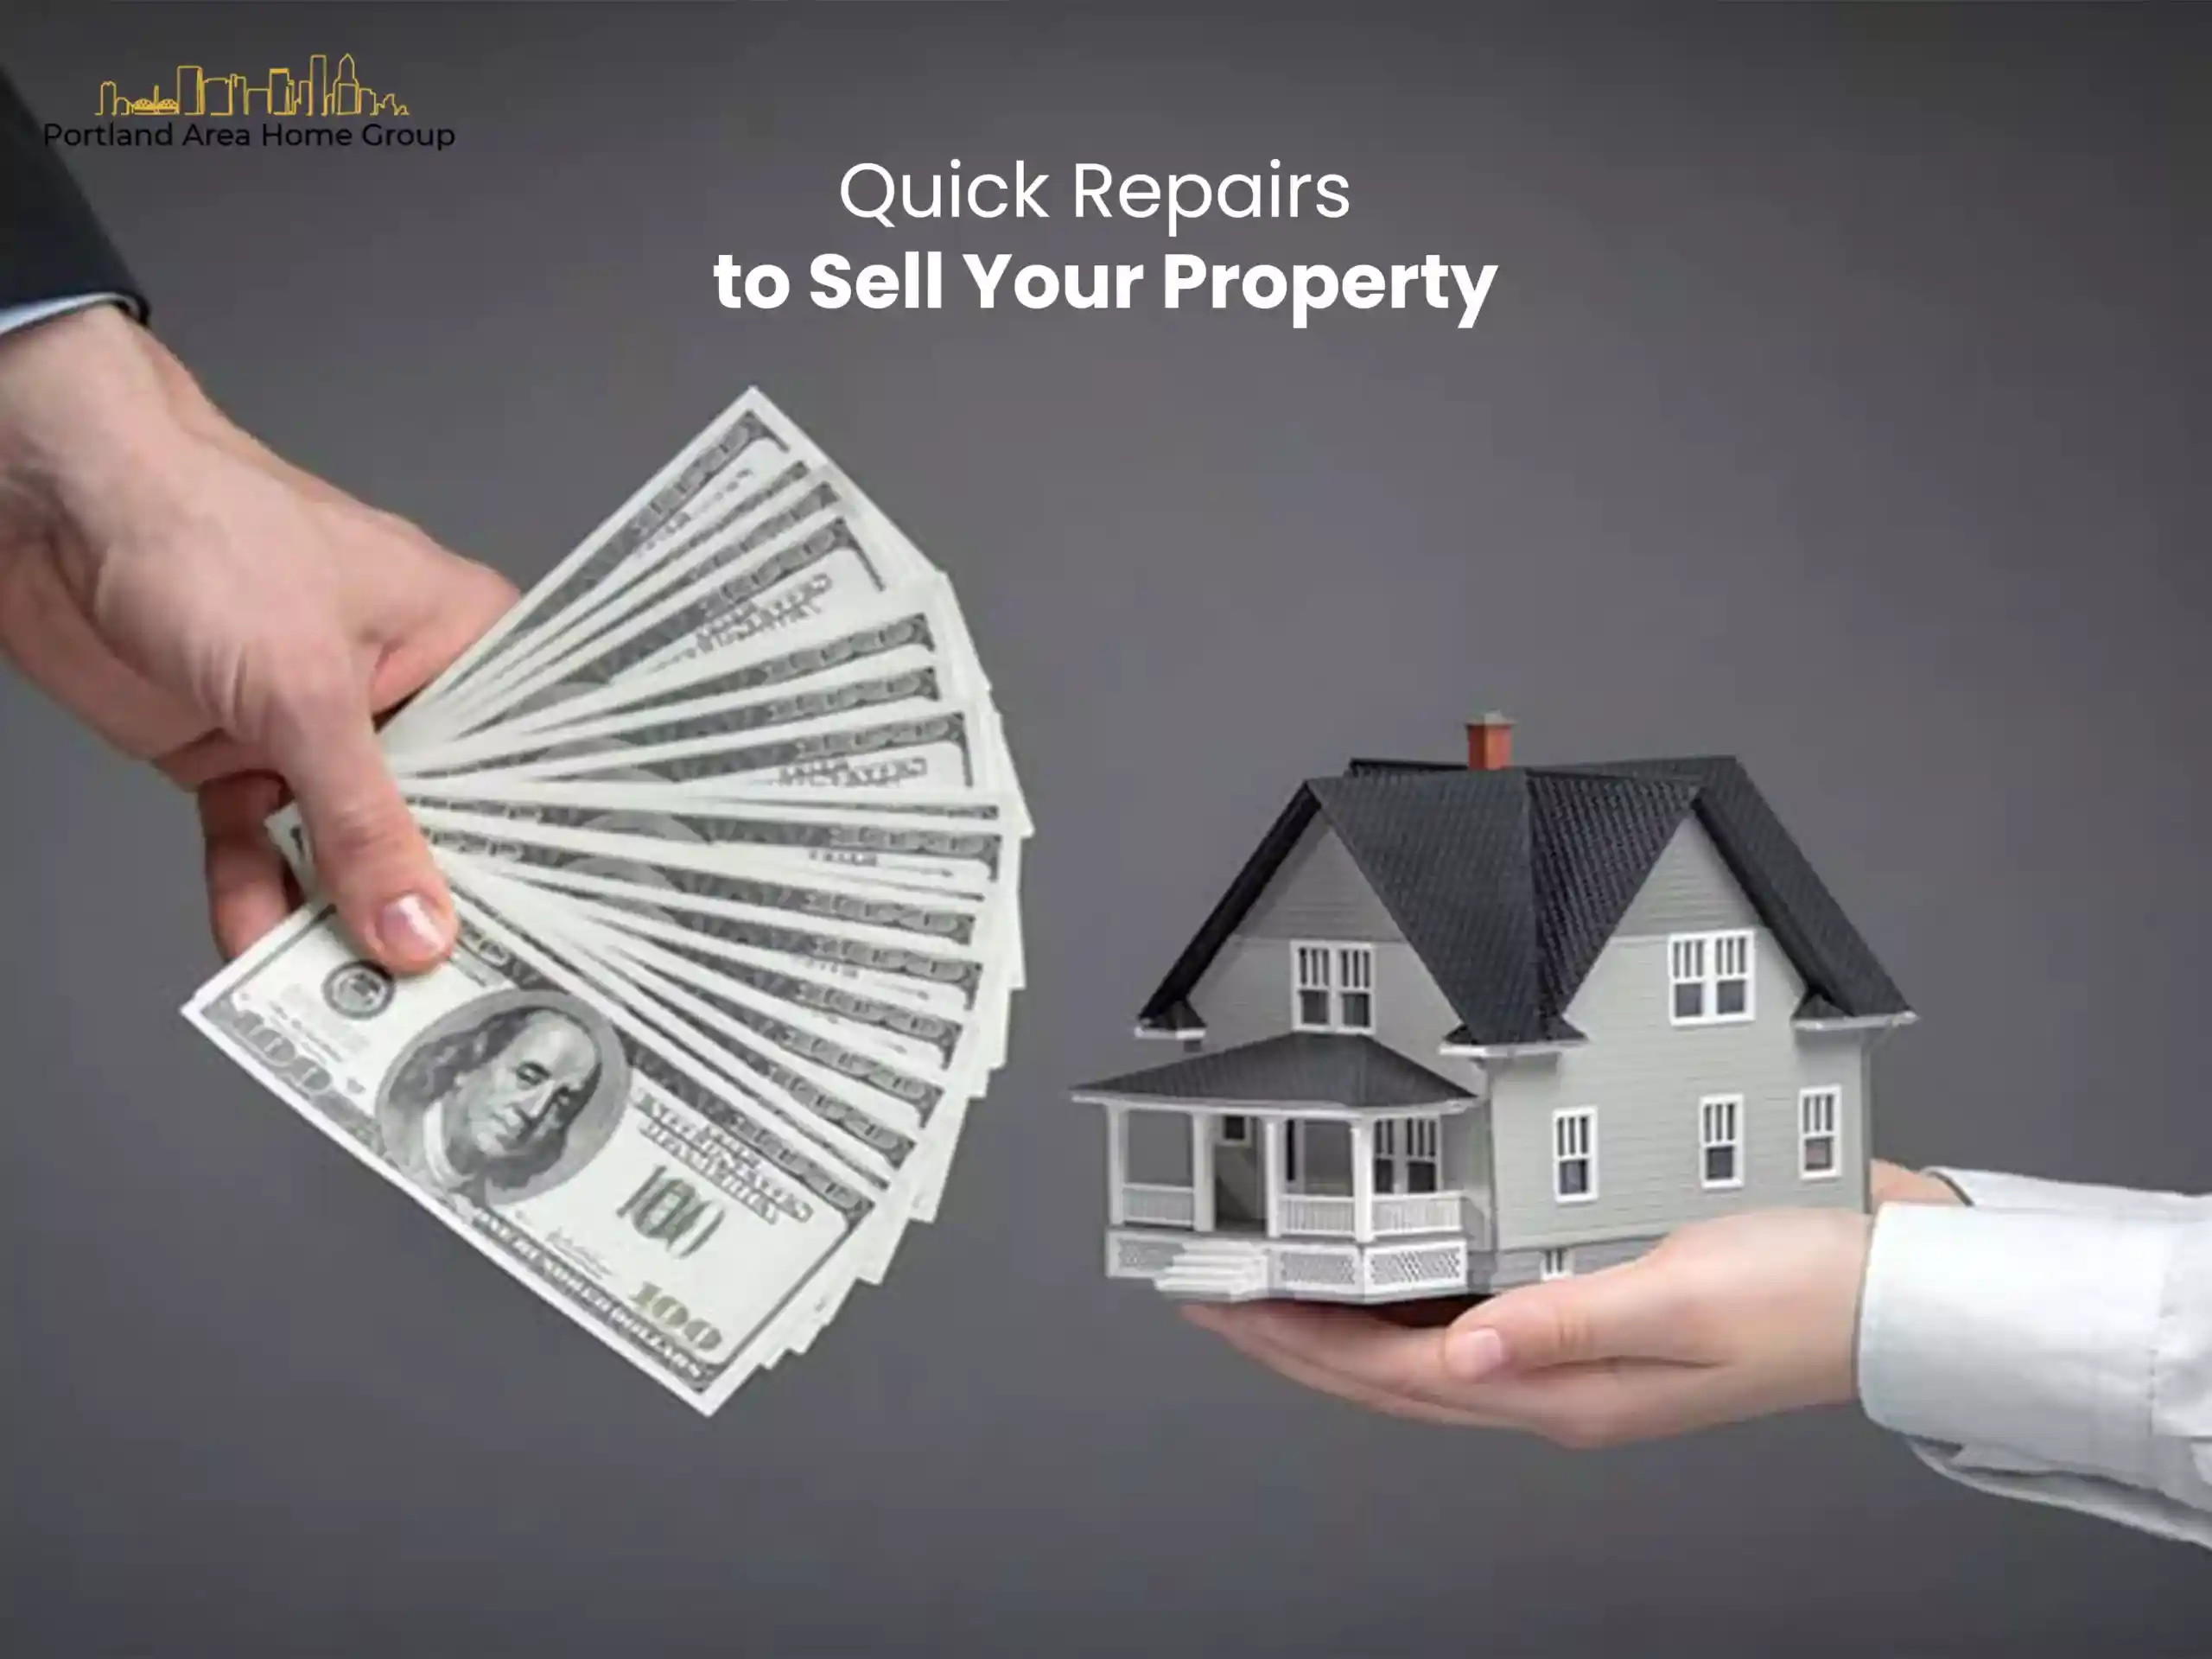 Quick Repairs to Sell Your Property